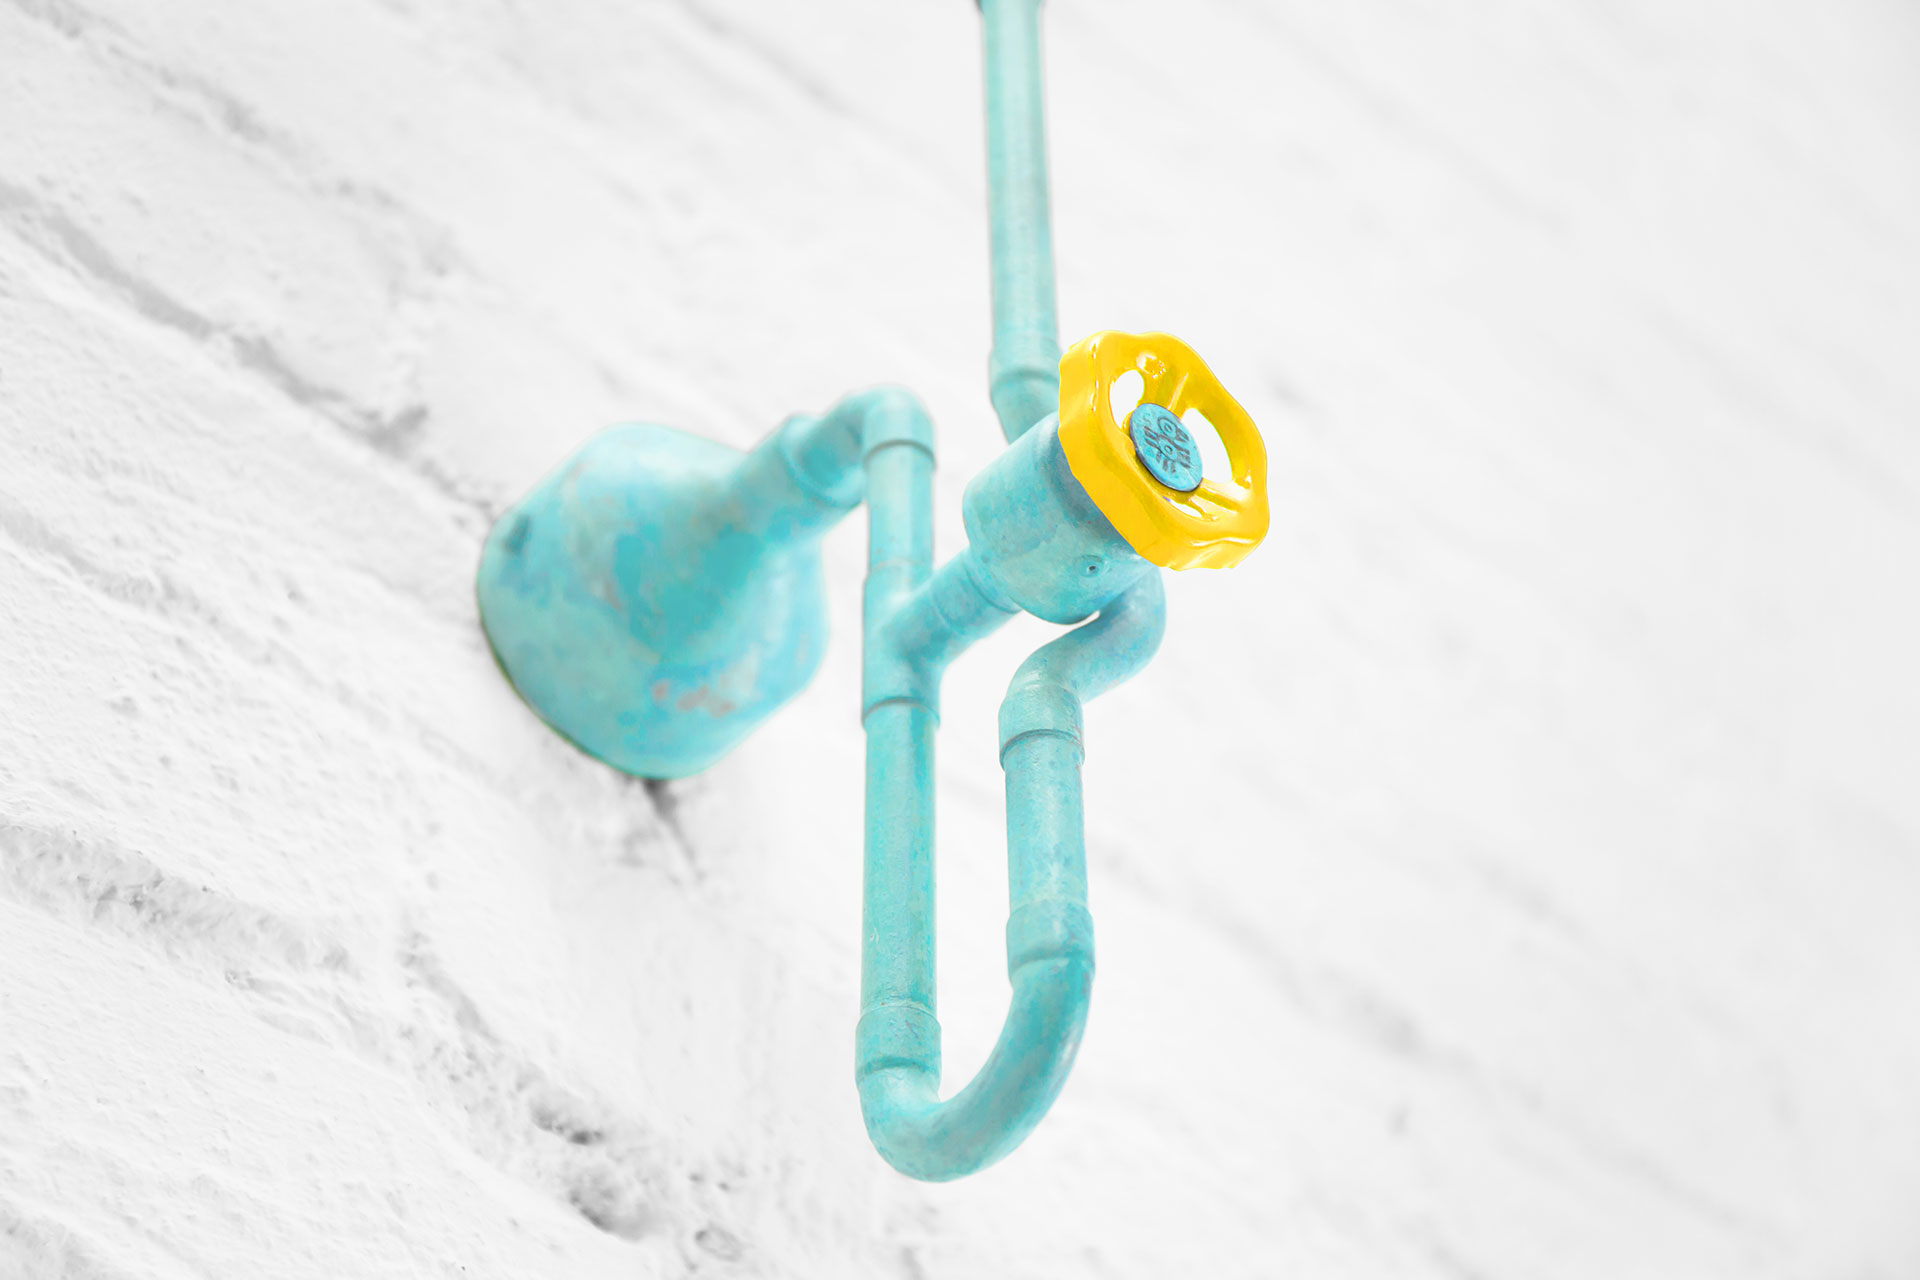 Unique turquoise sconce with yellow dimmer inspired by loft design